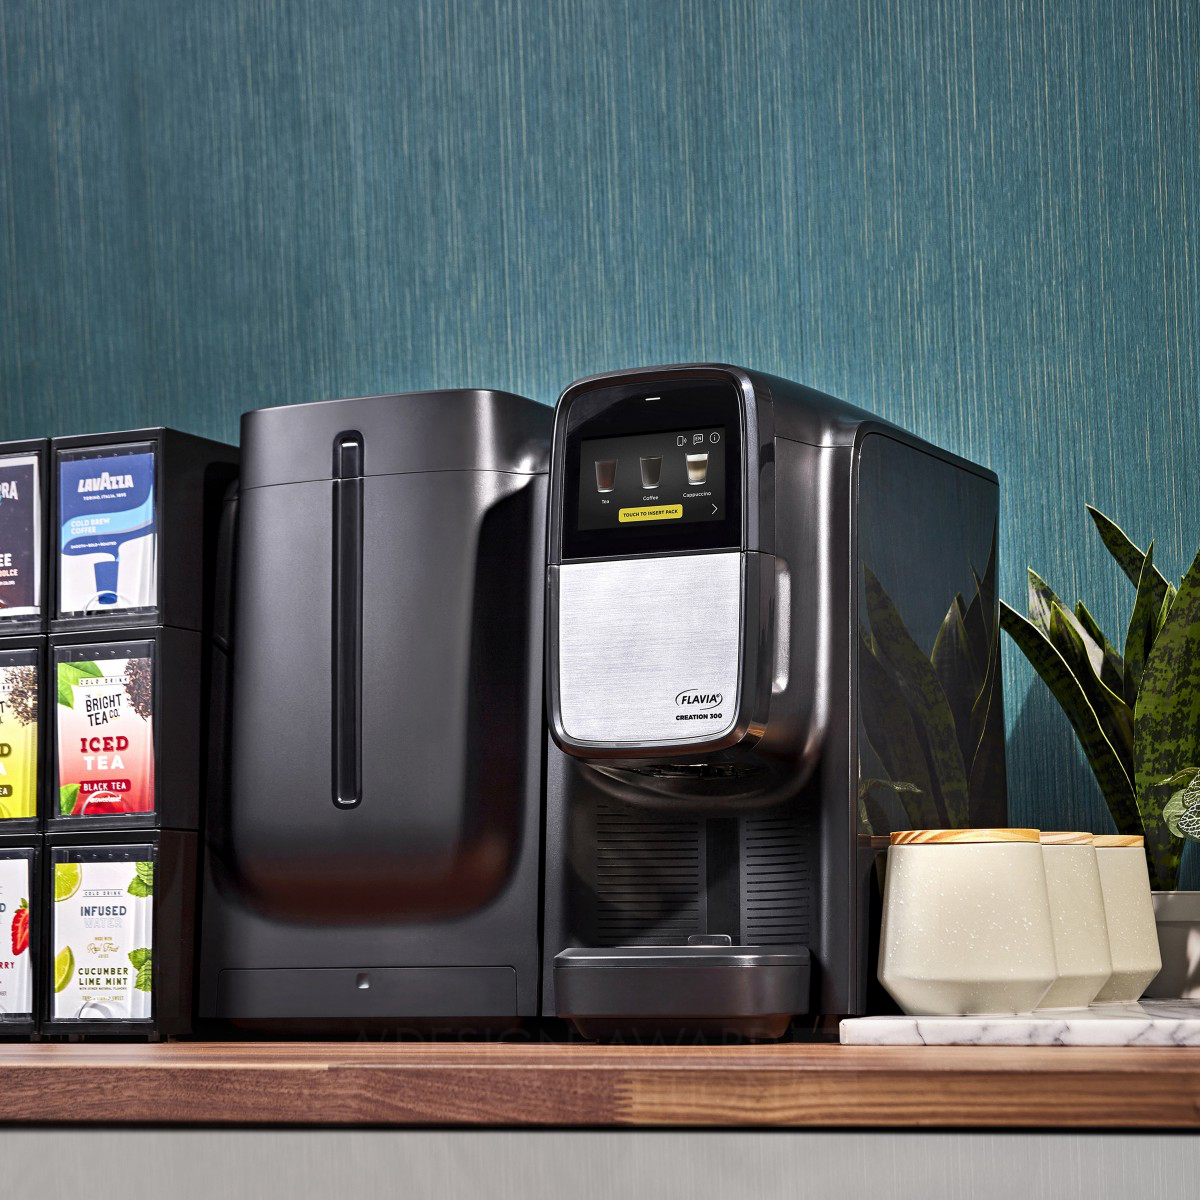 Florian Seidl wins Bronze at the prestigious A' Office and Business Appliances Design Award with Flavia C300 And Chill Refresh Workplace Beverage System.